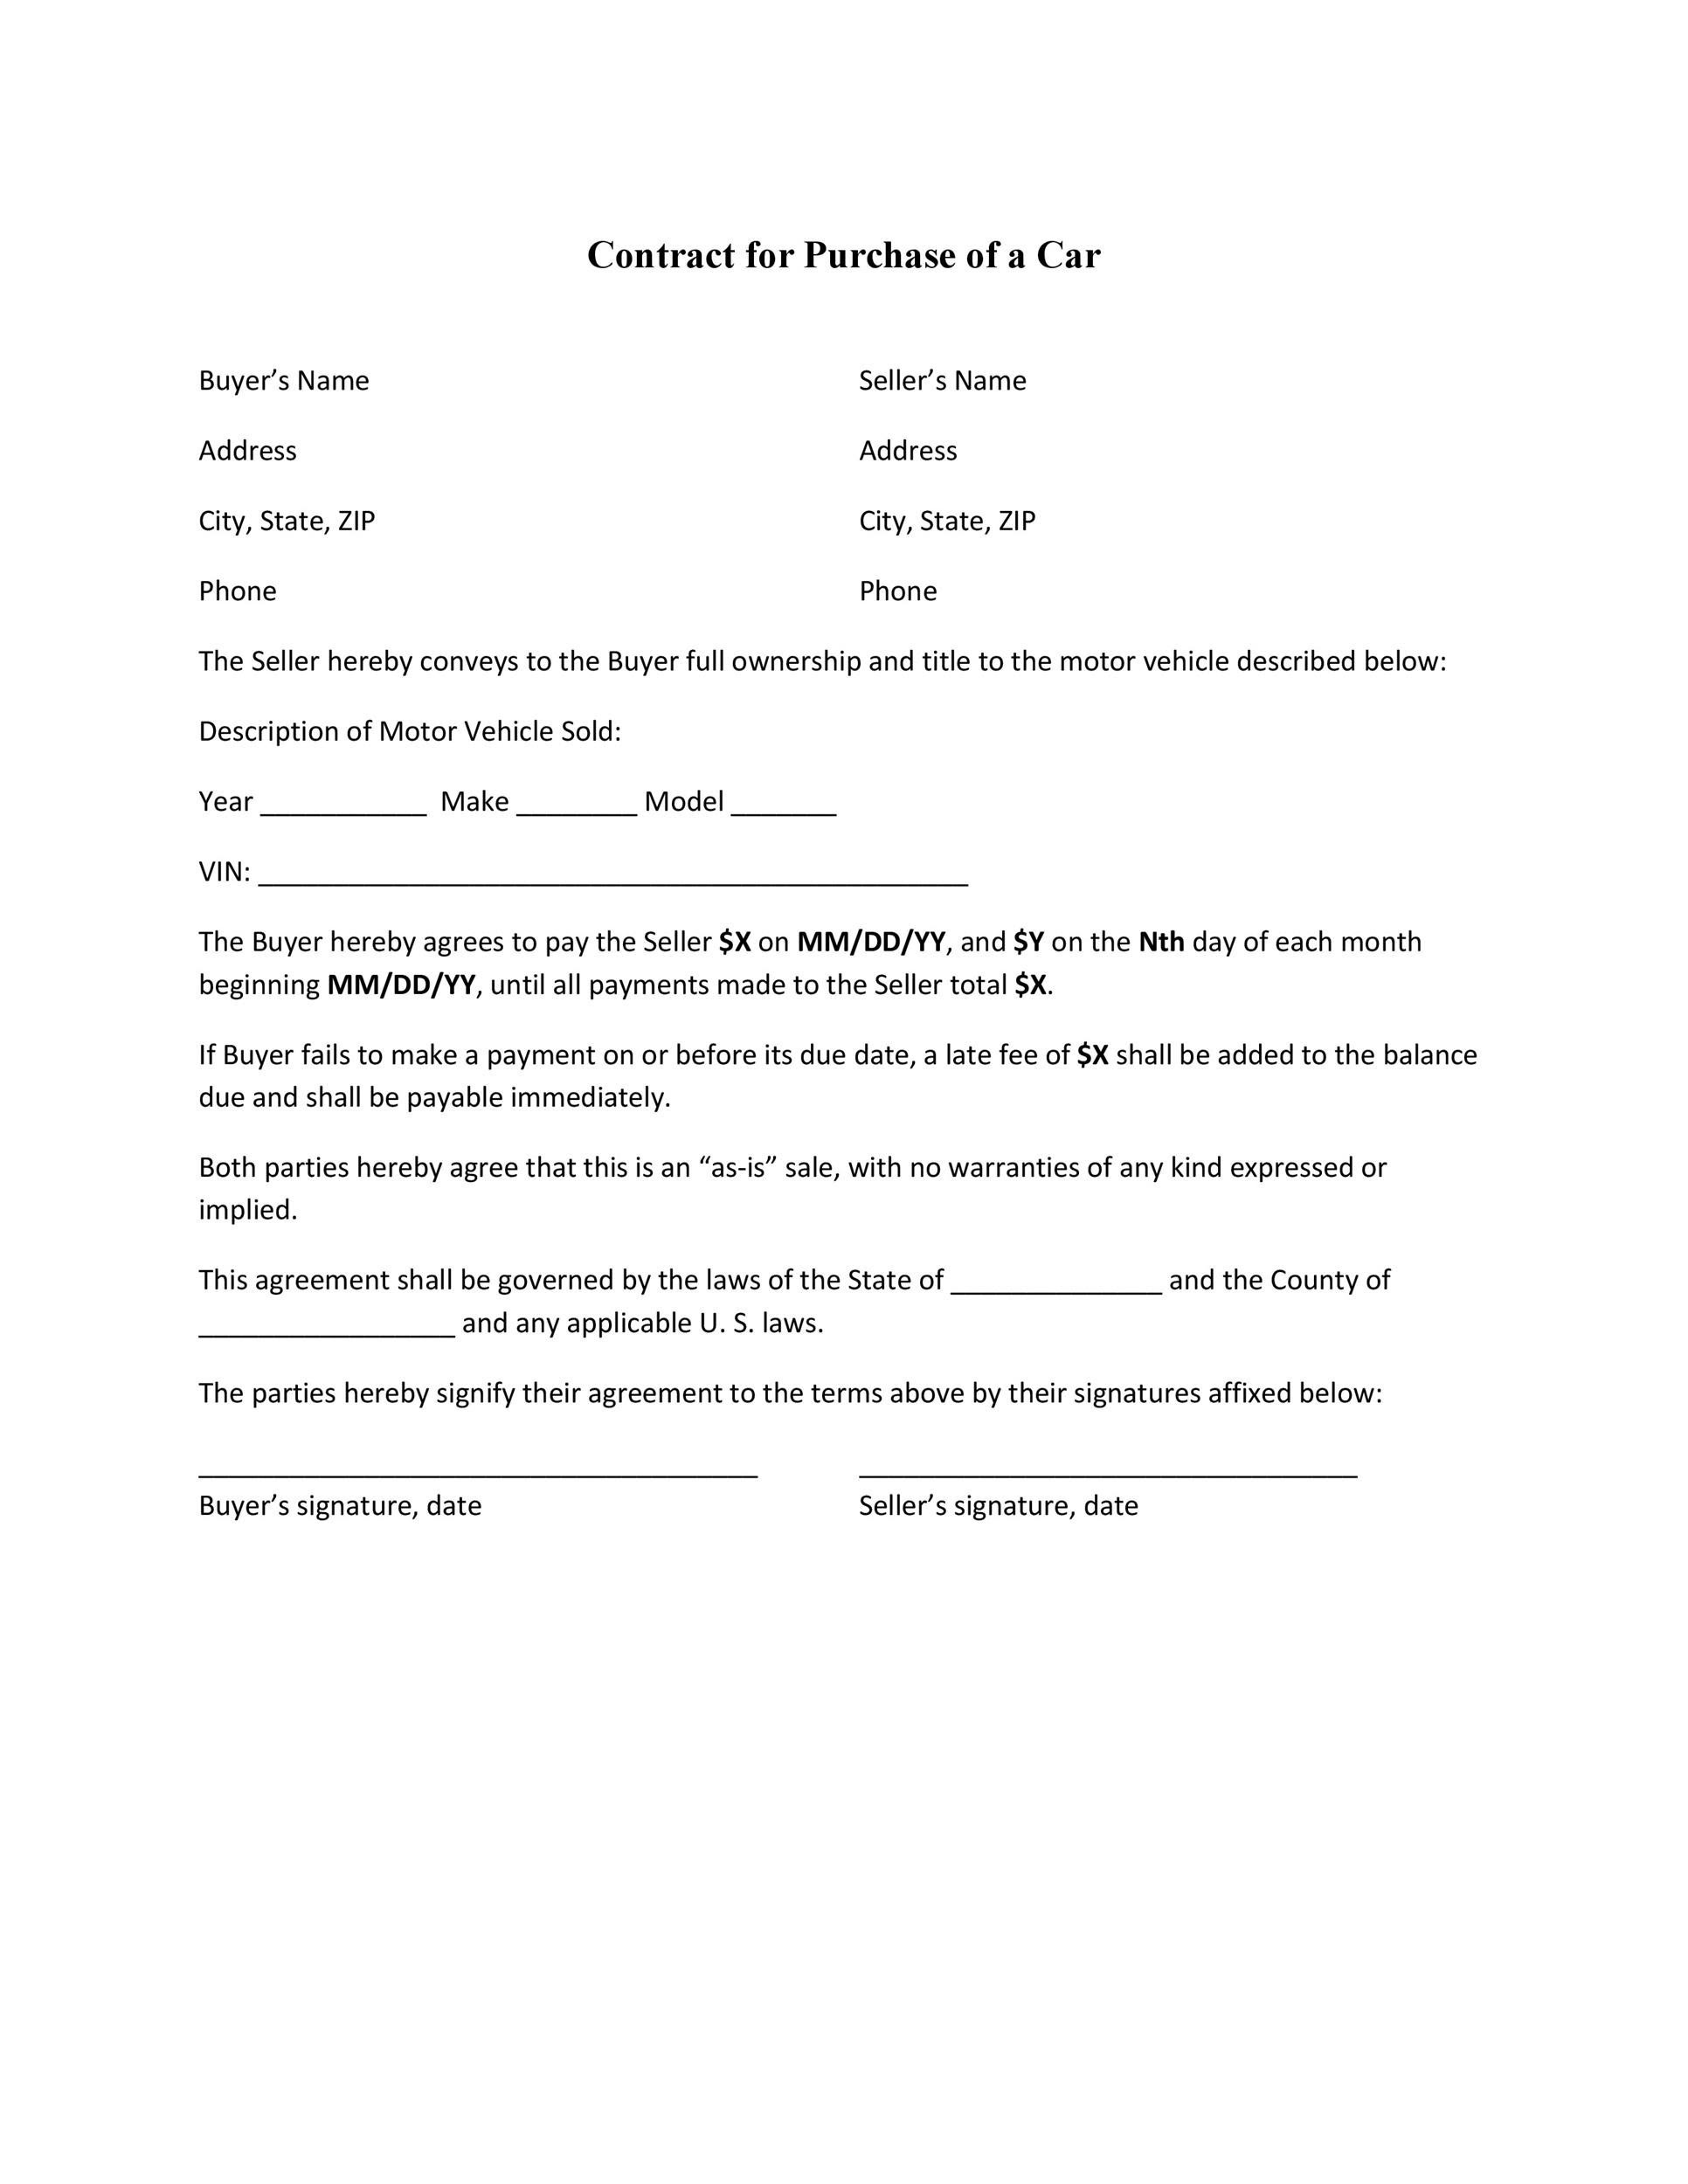 selling-my-car-agreement-letter-sample-best-of-document-template